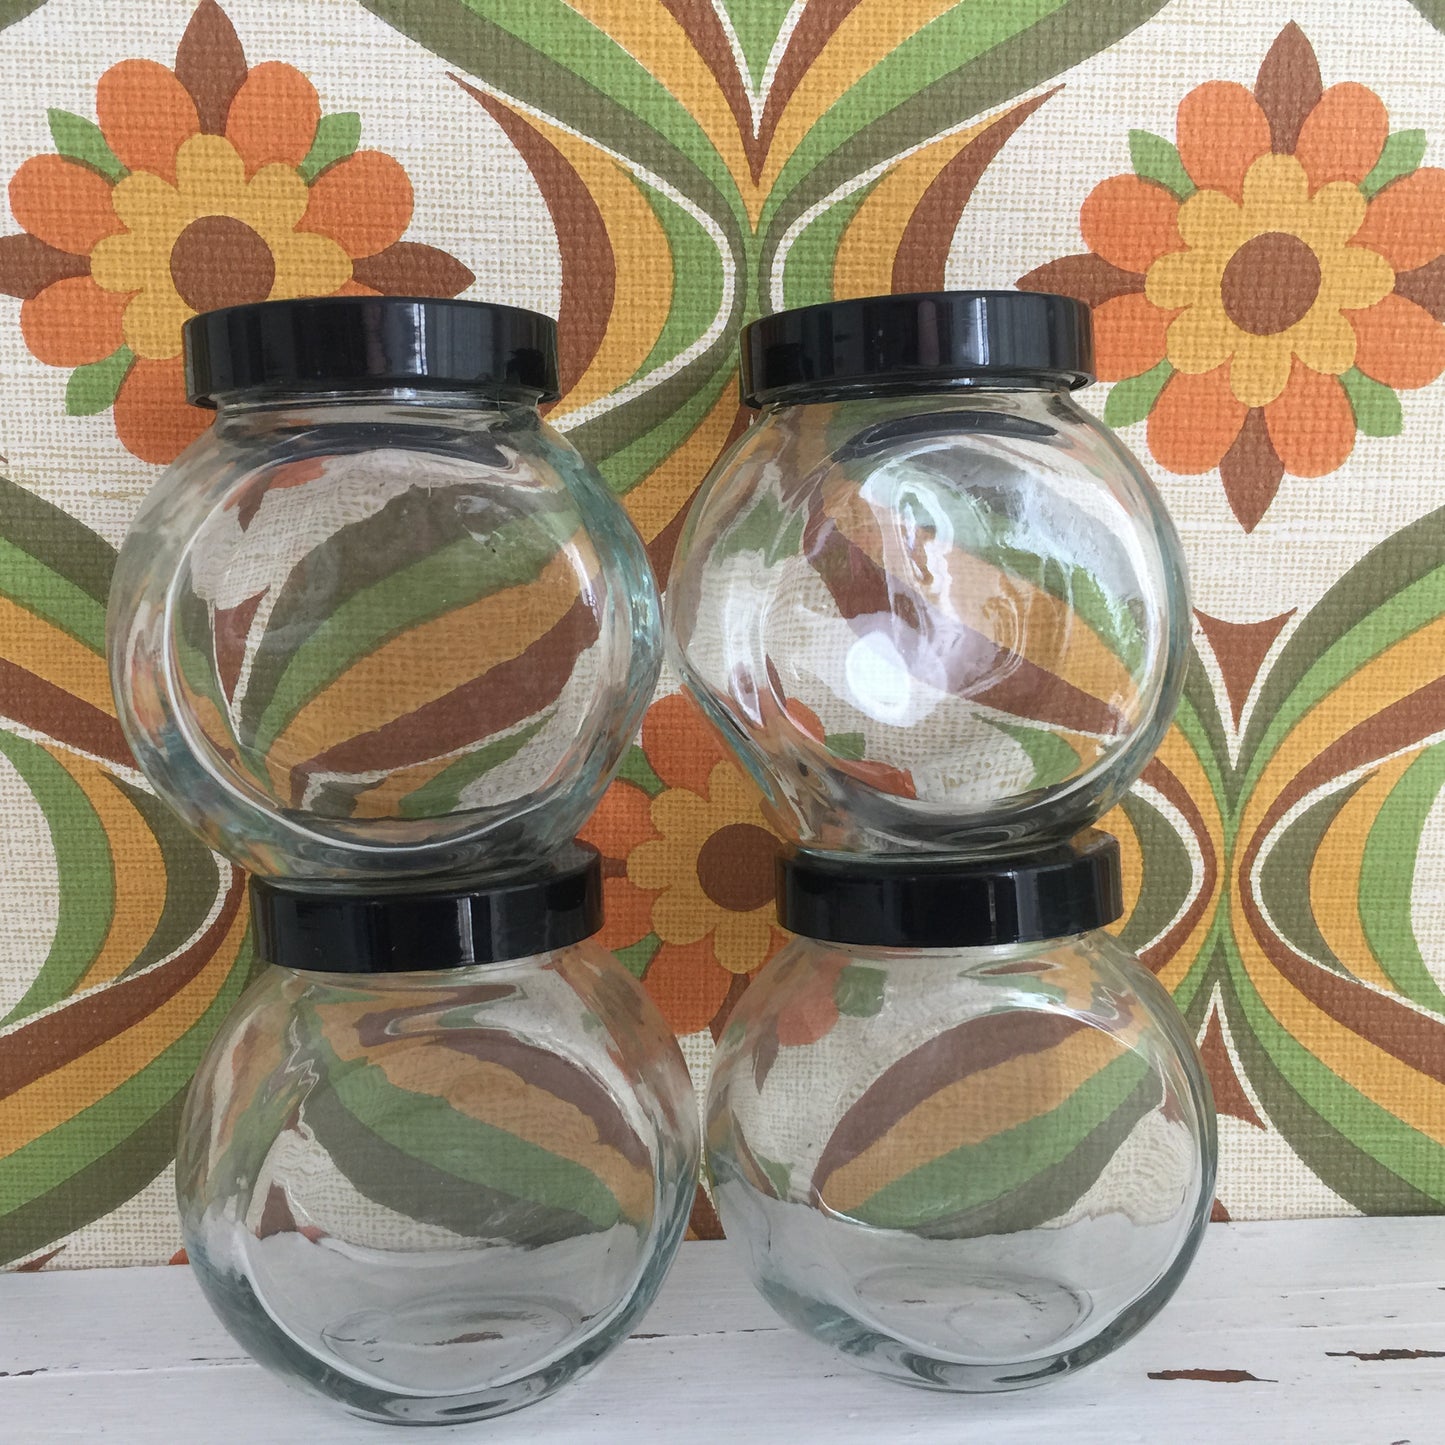 Cute SET of Vintage Style Jars with Black Lids Glass Containers Craft Kitchen